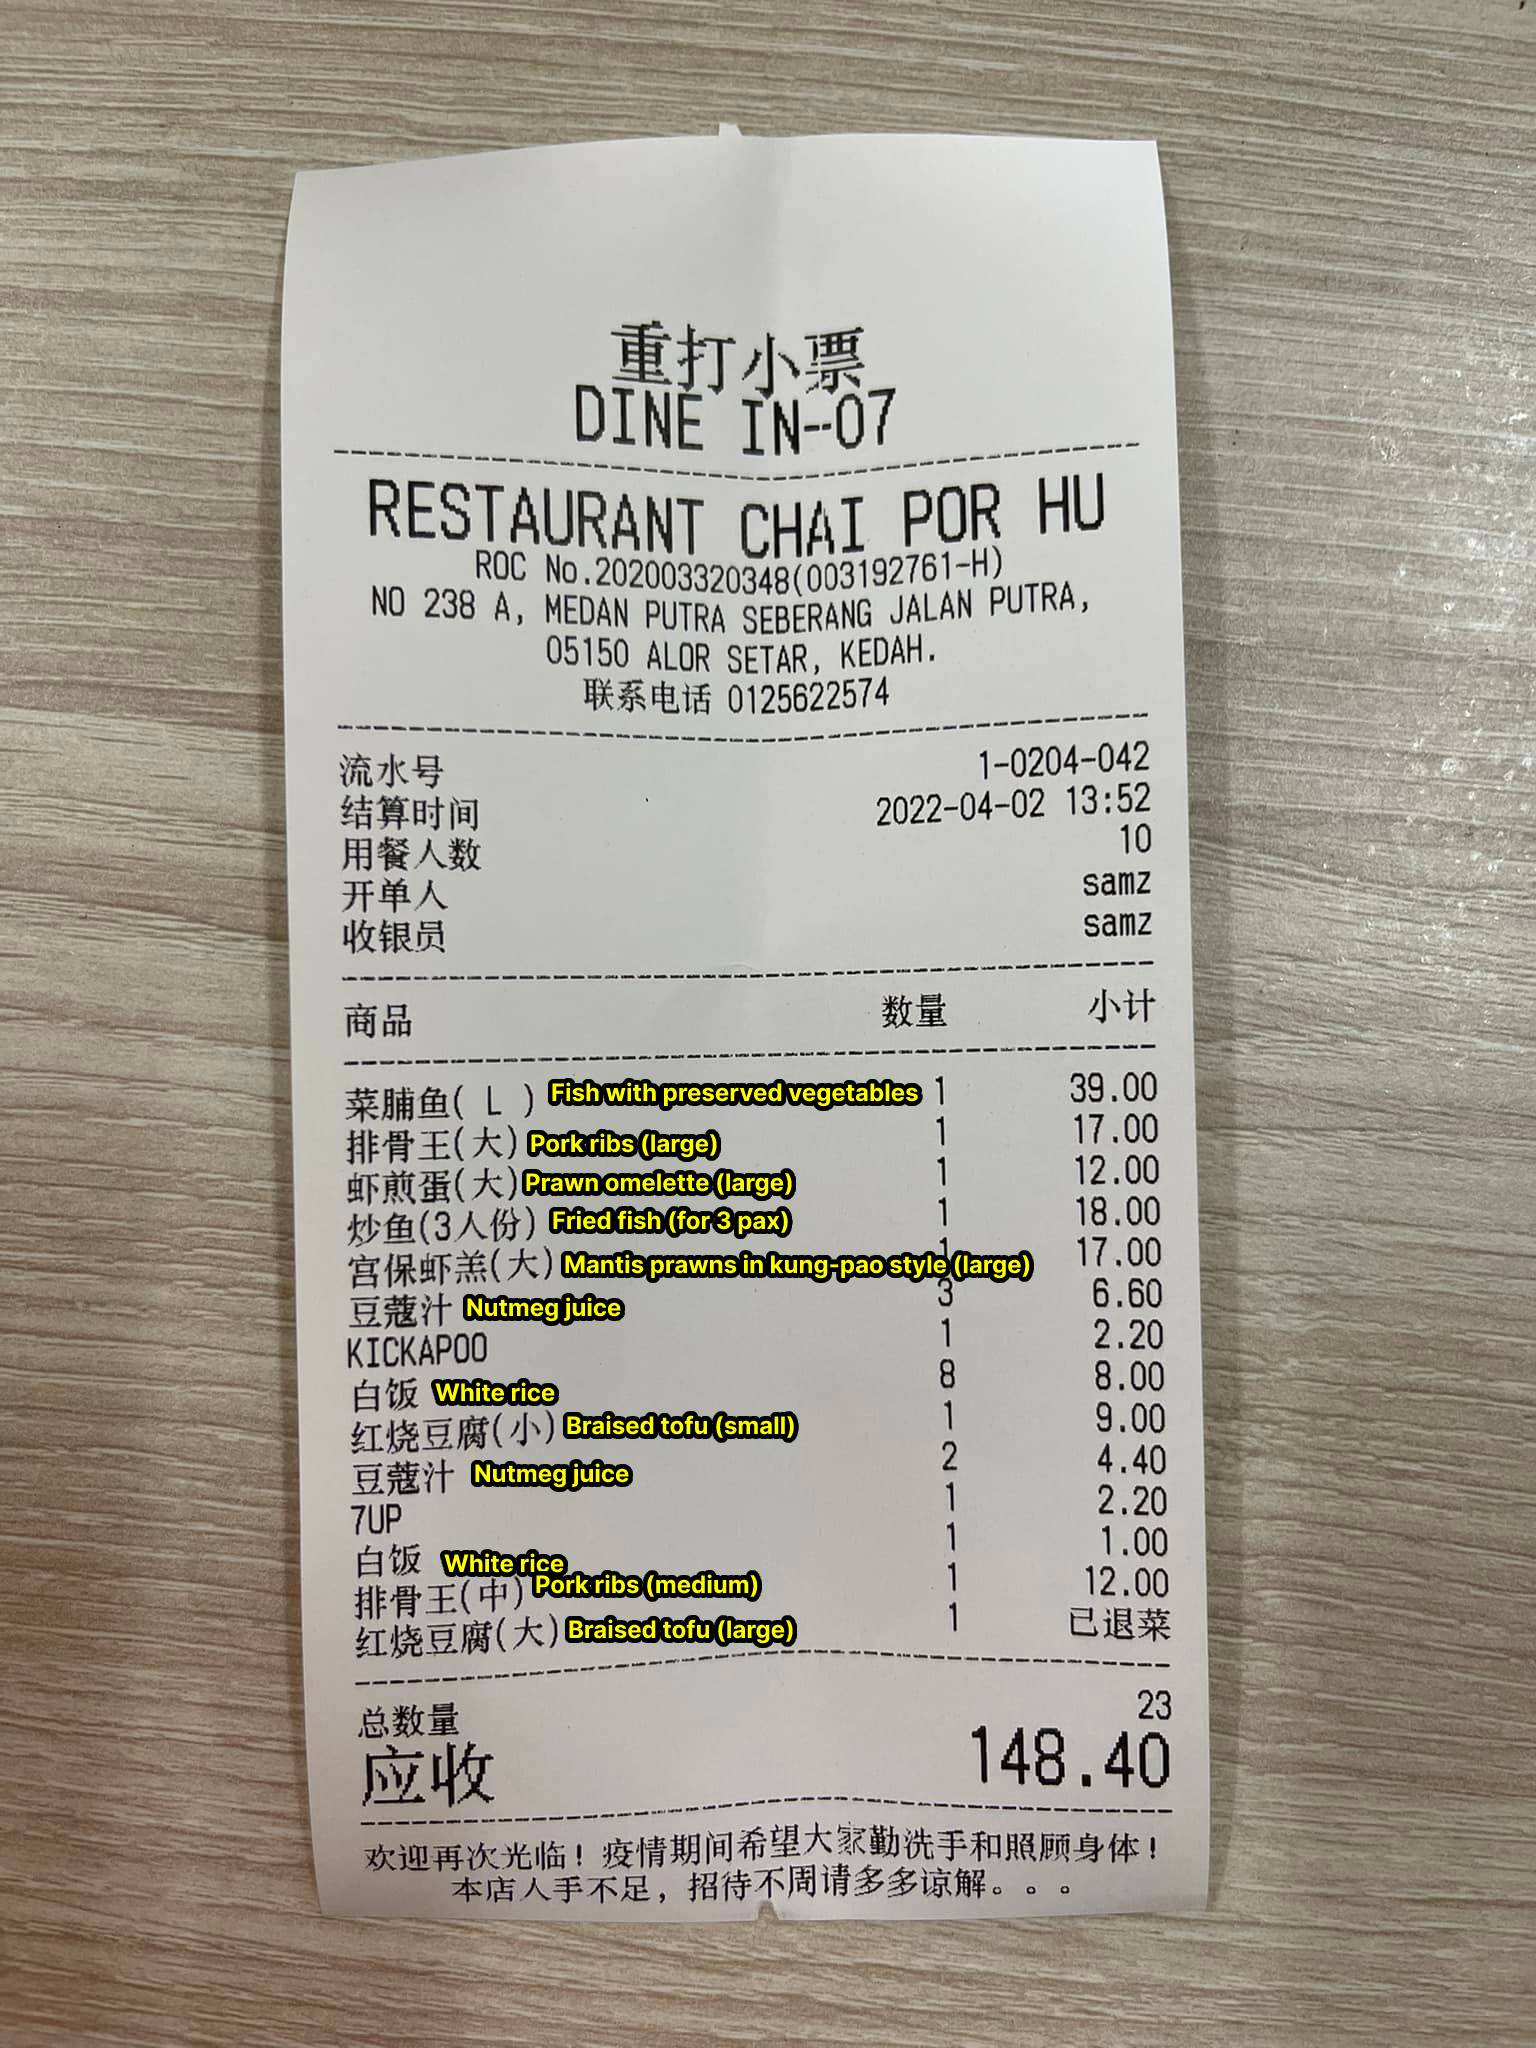 The receipt shows that the family of 9 had paid RM148.80 for 7 dishes as well as rice and tea. Source: Samz Wong